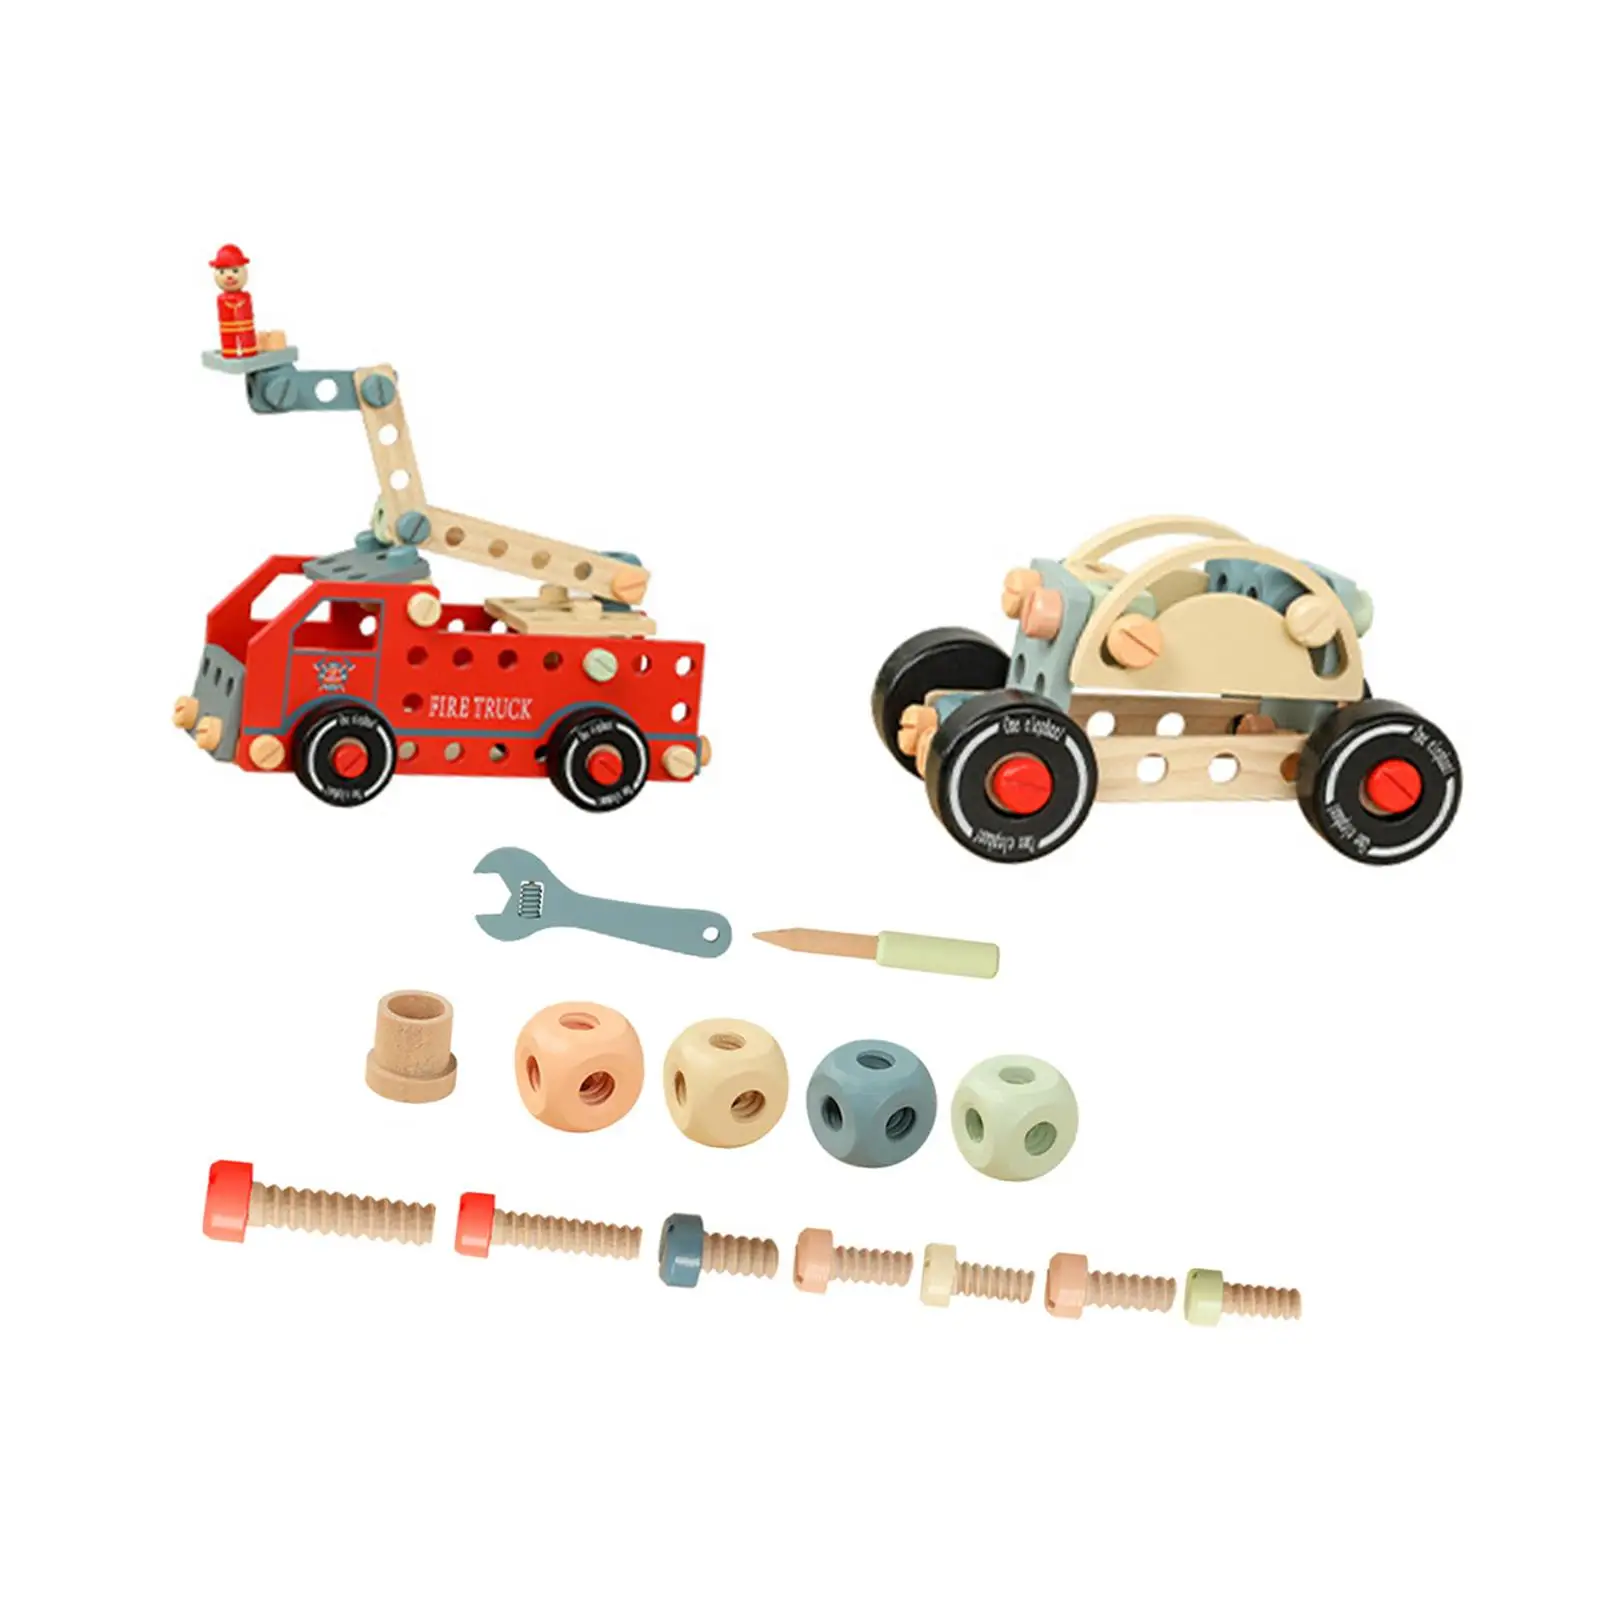 Kids Construction Toy Set Portable Fine Motor Skills Creative Cognitive Wooden Tool Set for Role Education Learning Indoor